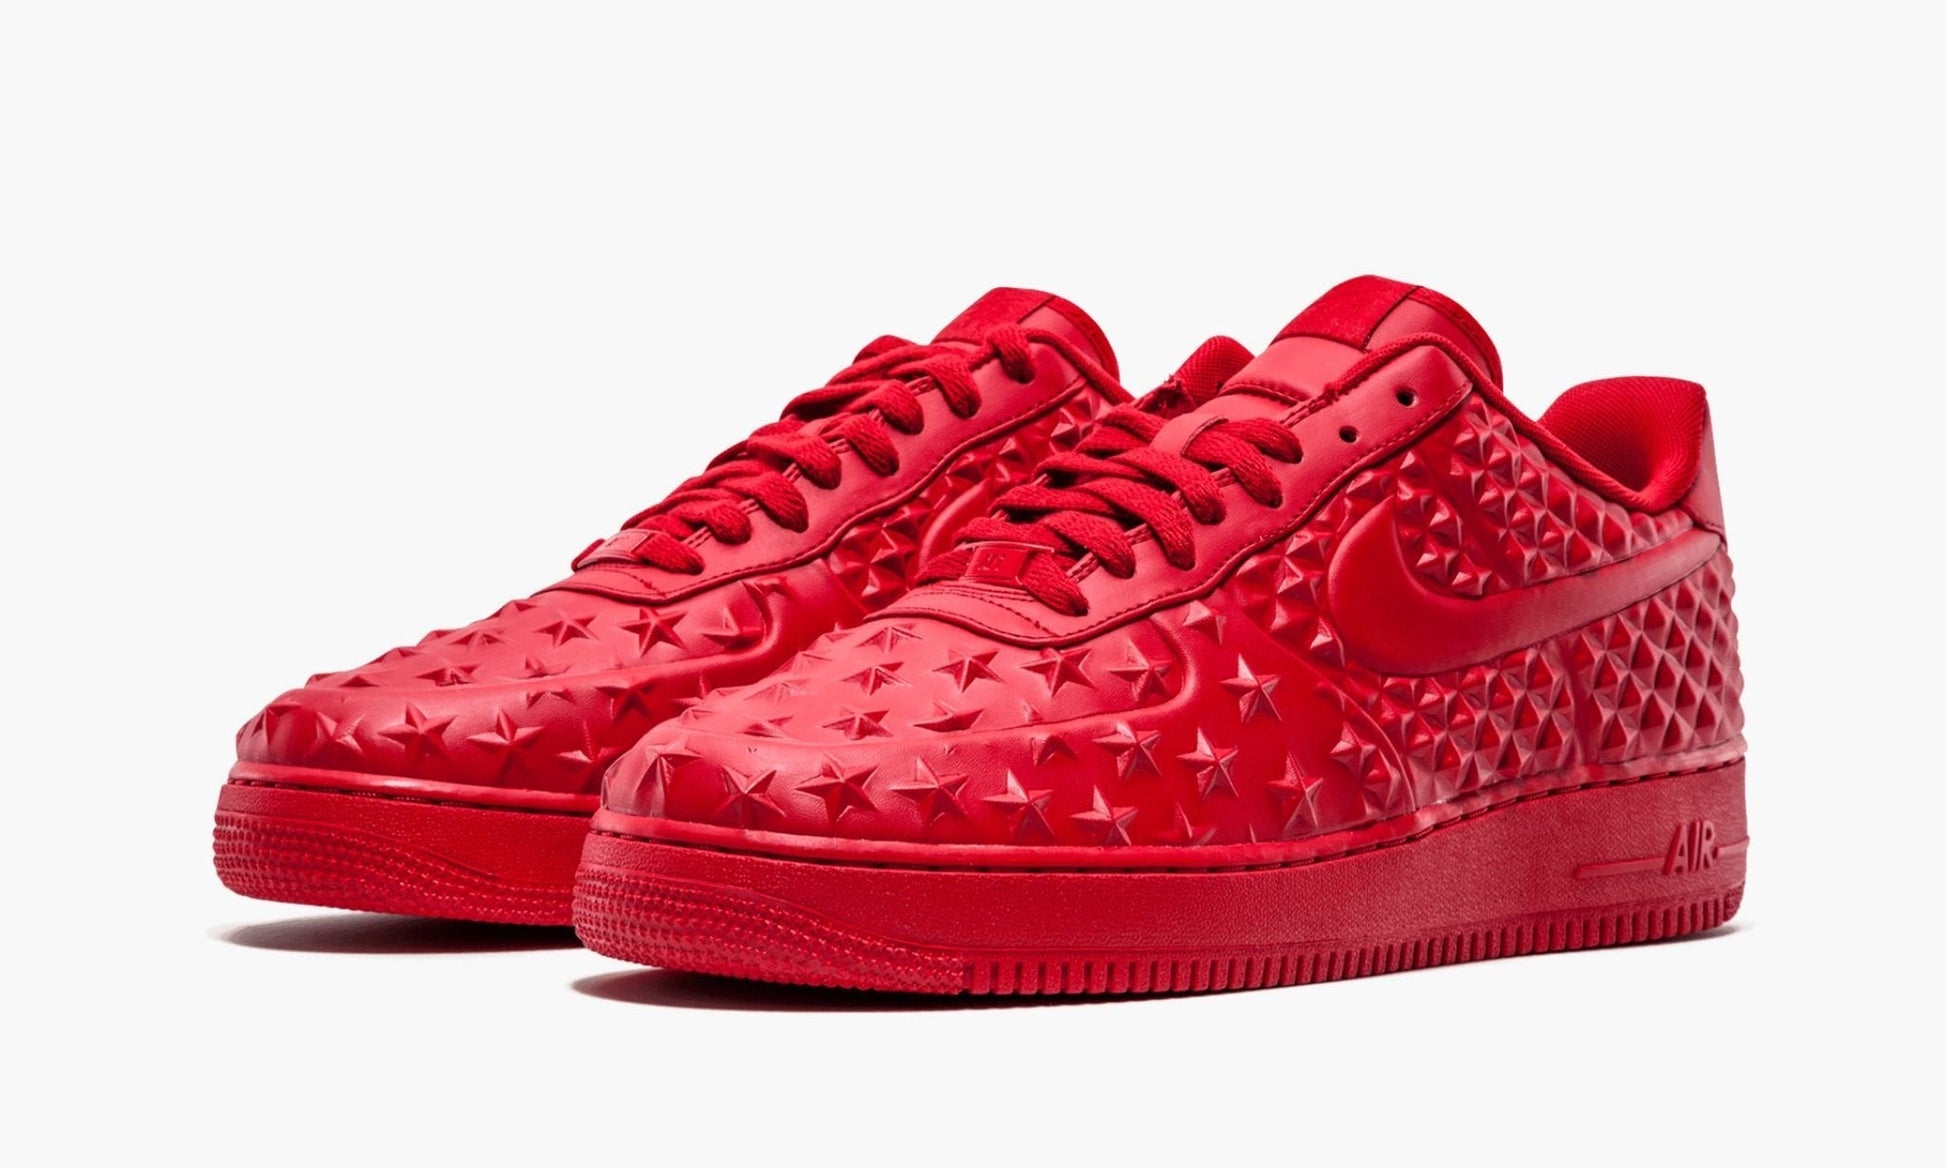 Nike Air Force 1 Low Independence Day Red Stud Stars 789104-600 Men's Shoes  11.5